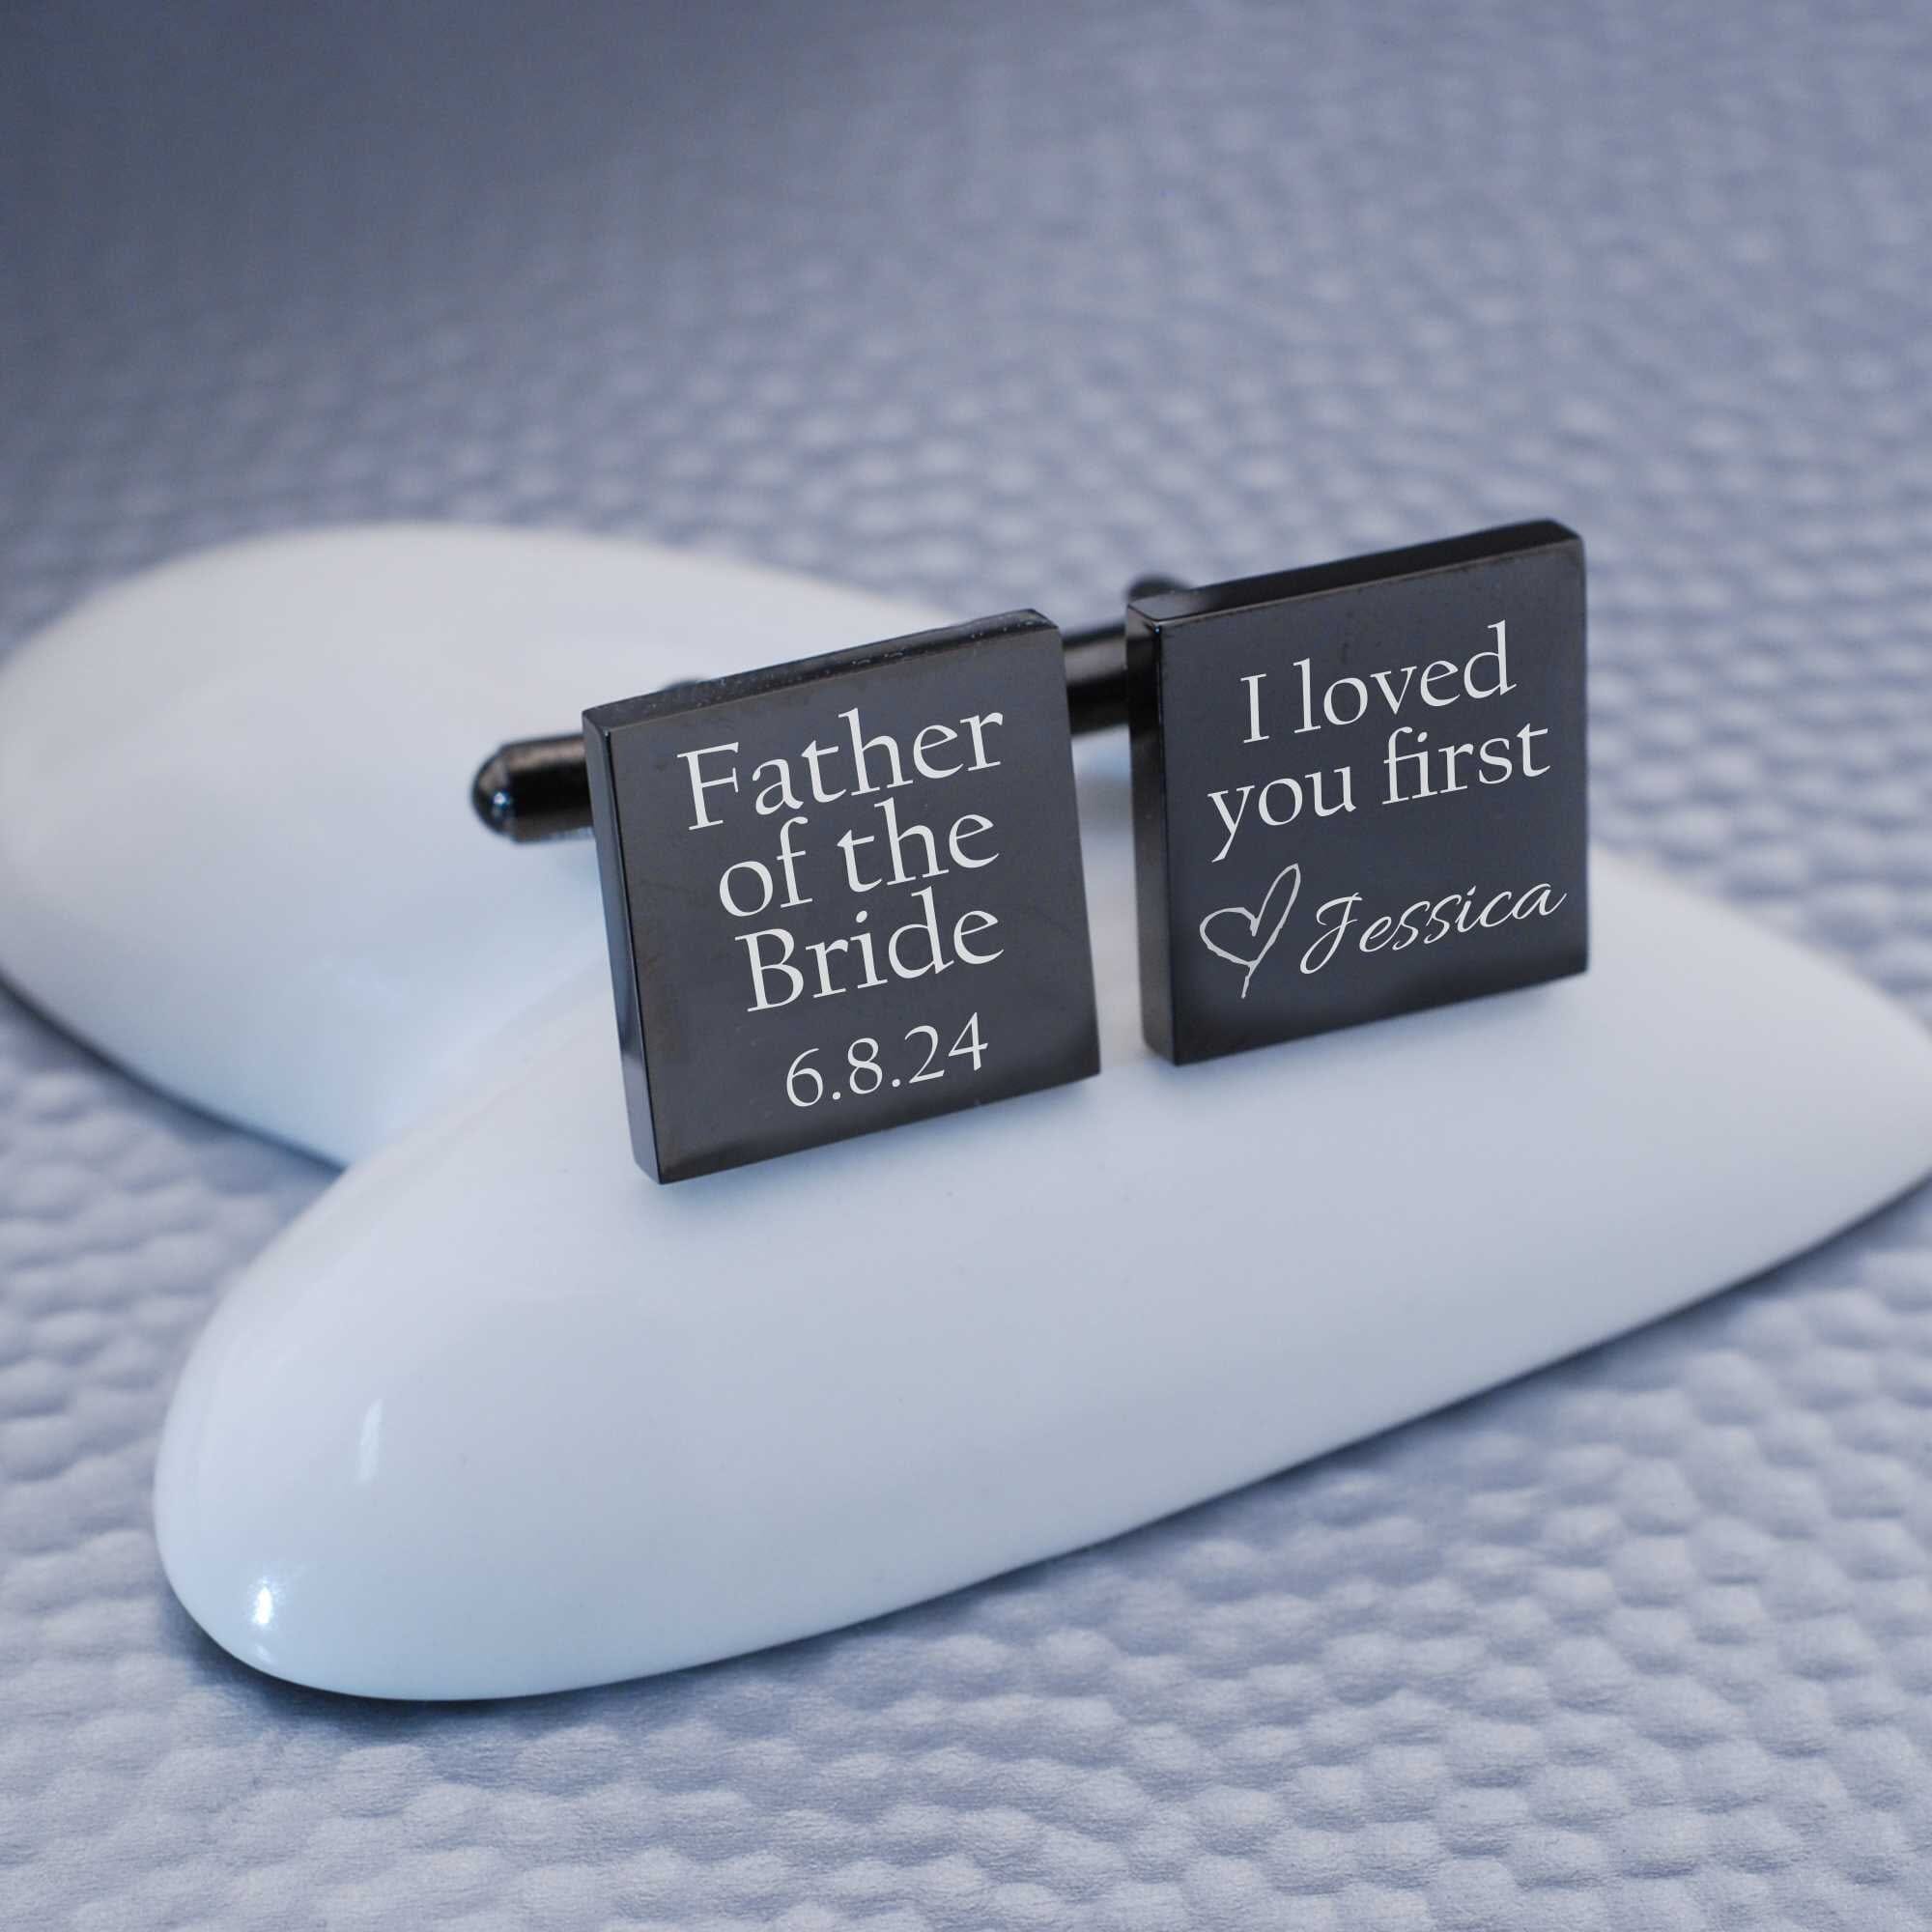 I Loved You First - Father of the Bride Cufflinks